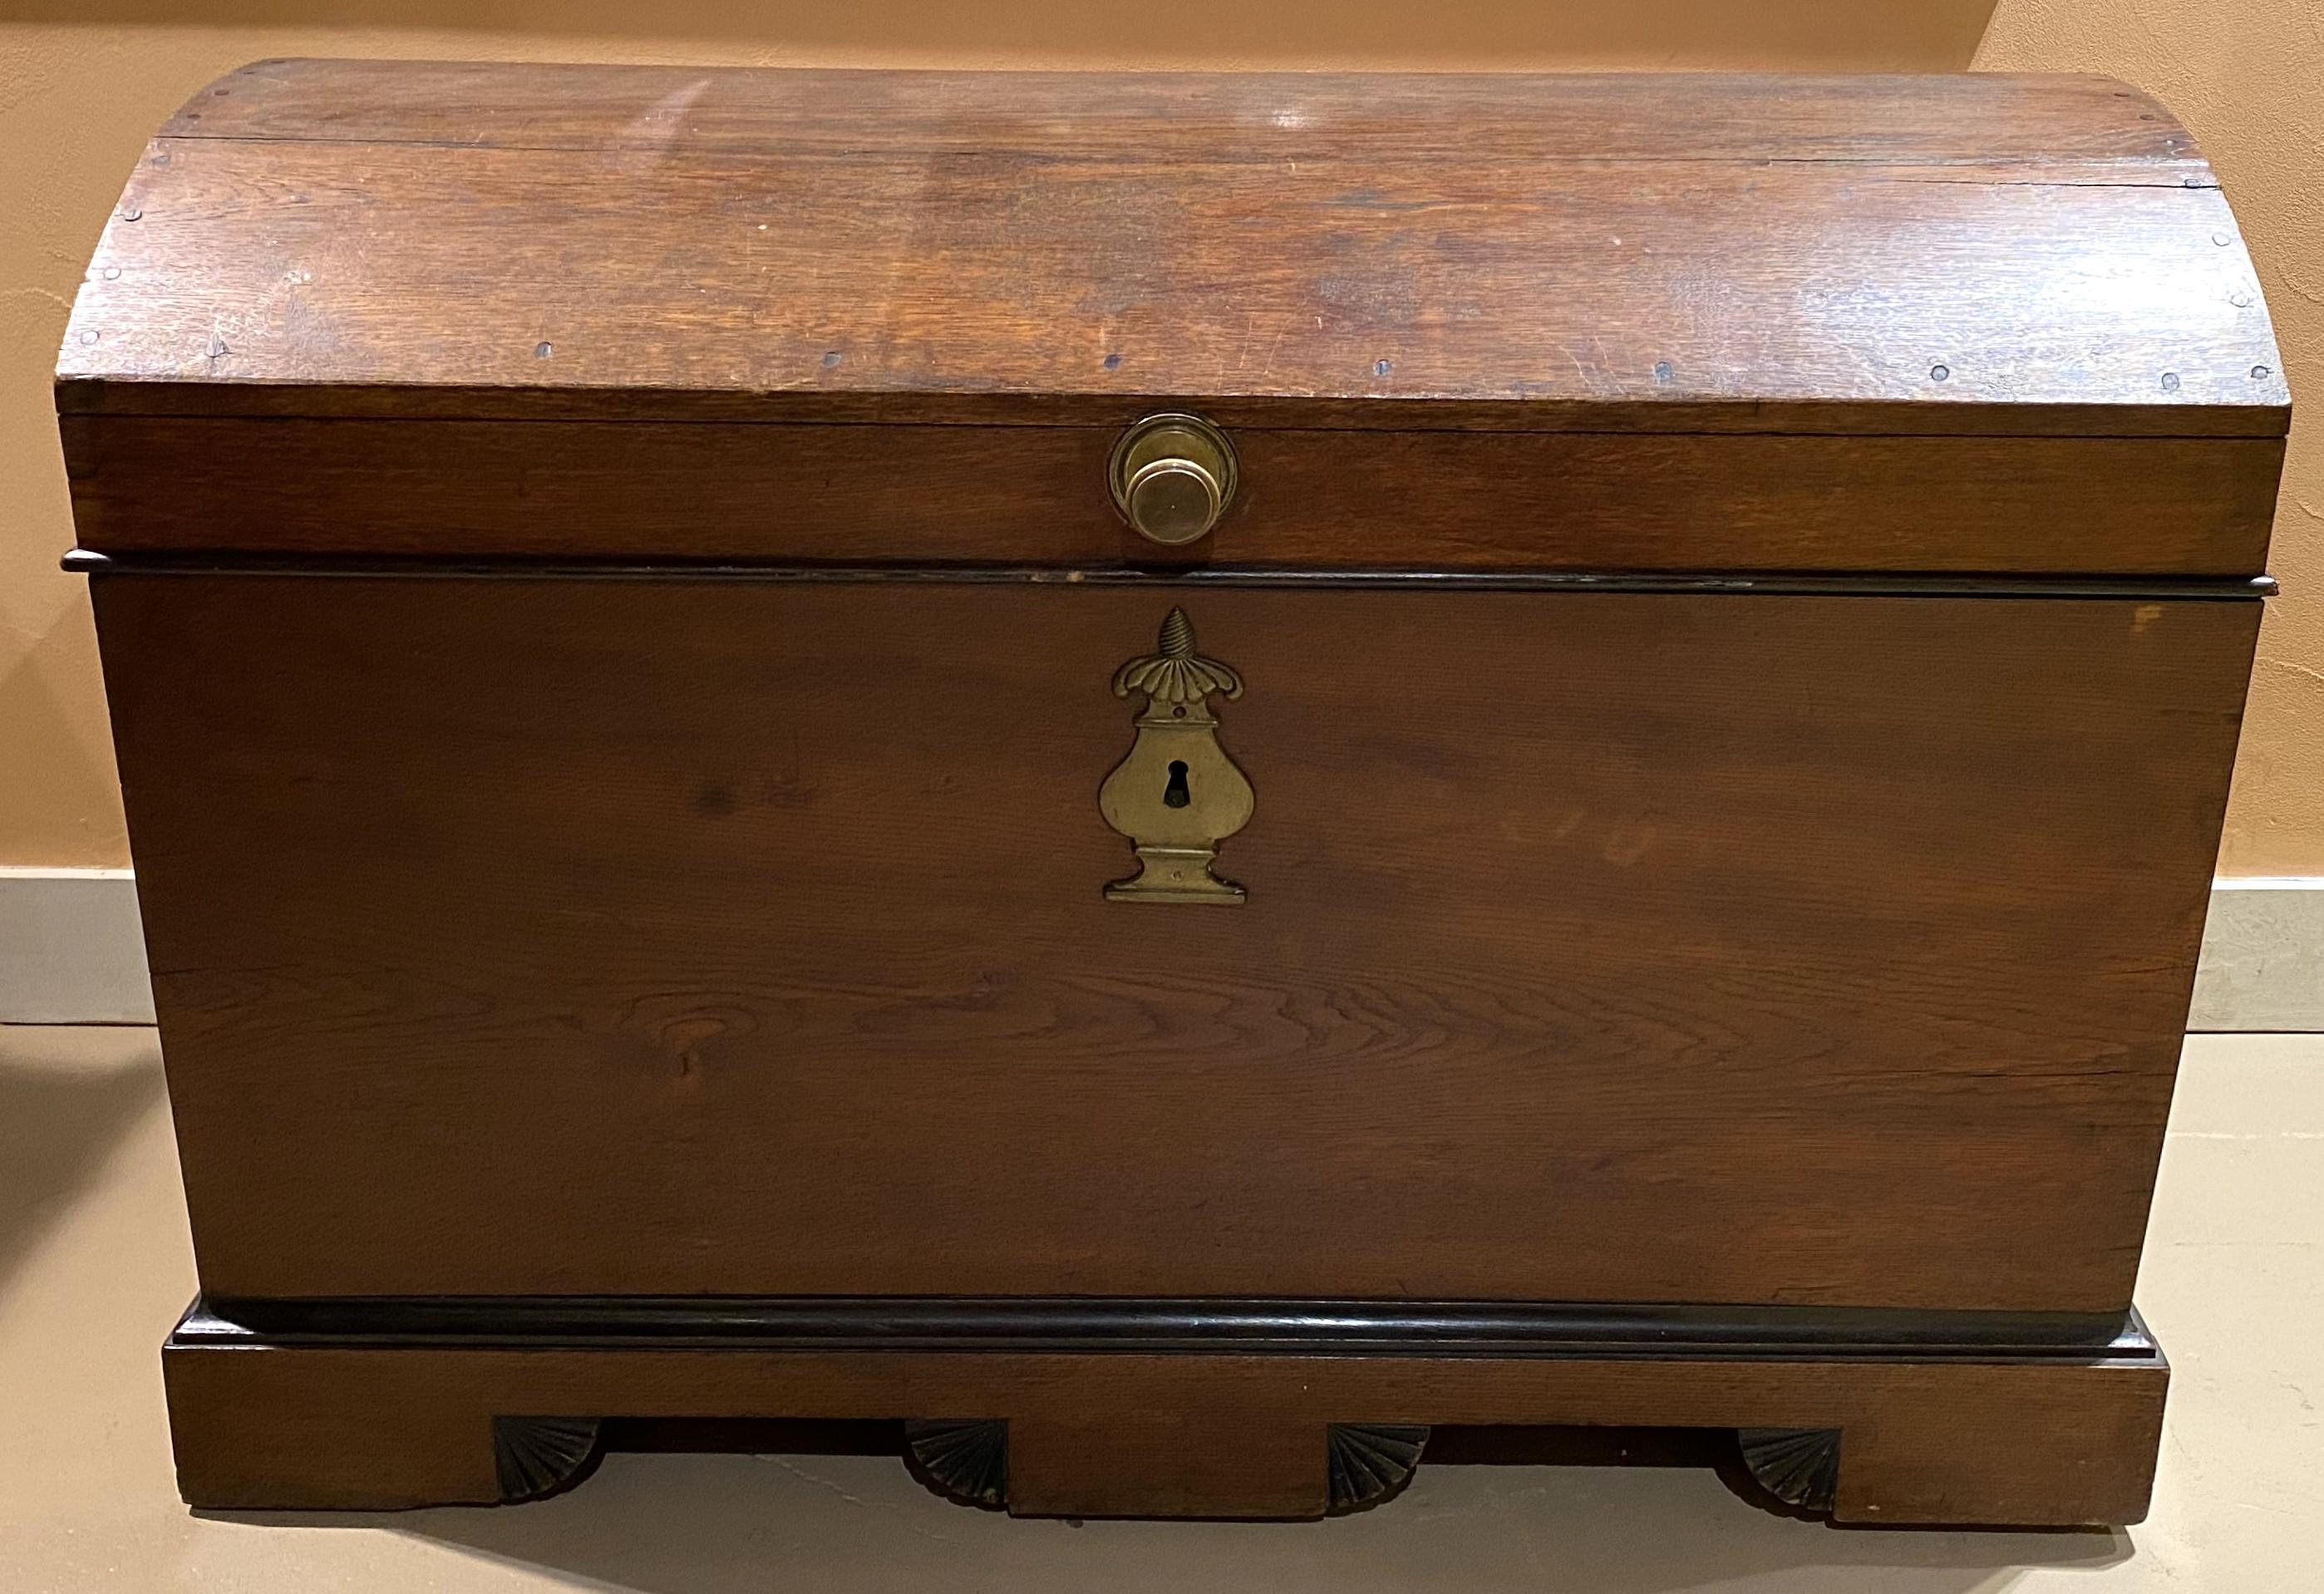 A fine 18th/19th century European oak dome top trunk with original hardware, including iron strap hinges, heavy brass handles and urn form escutcheon, dovetailed and pegged construction, interior till, and shell carved decoration along the base. The